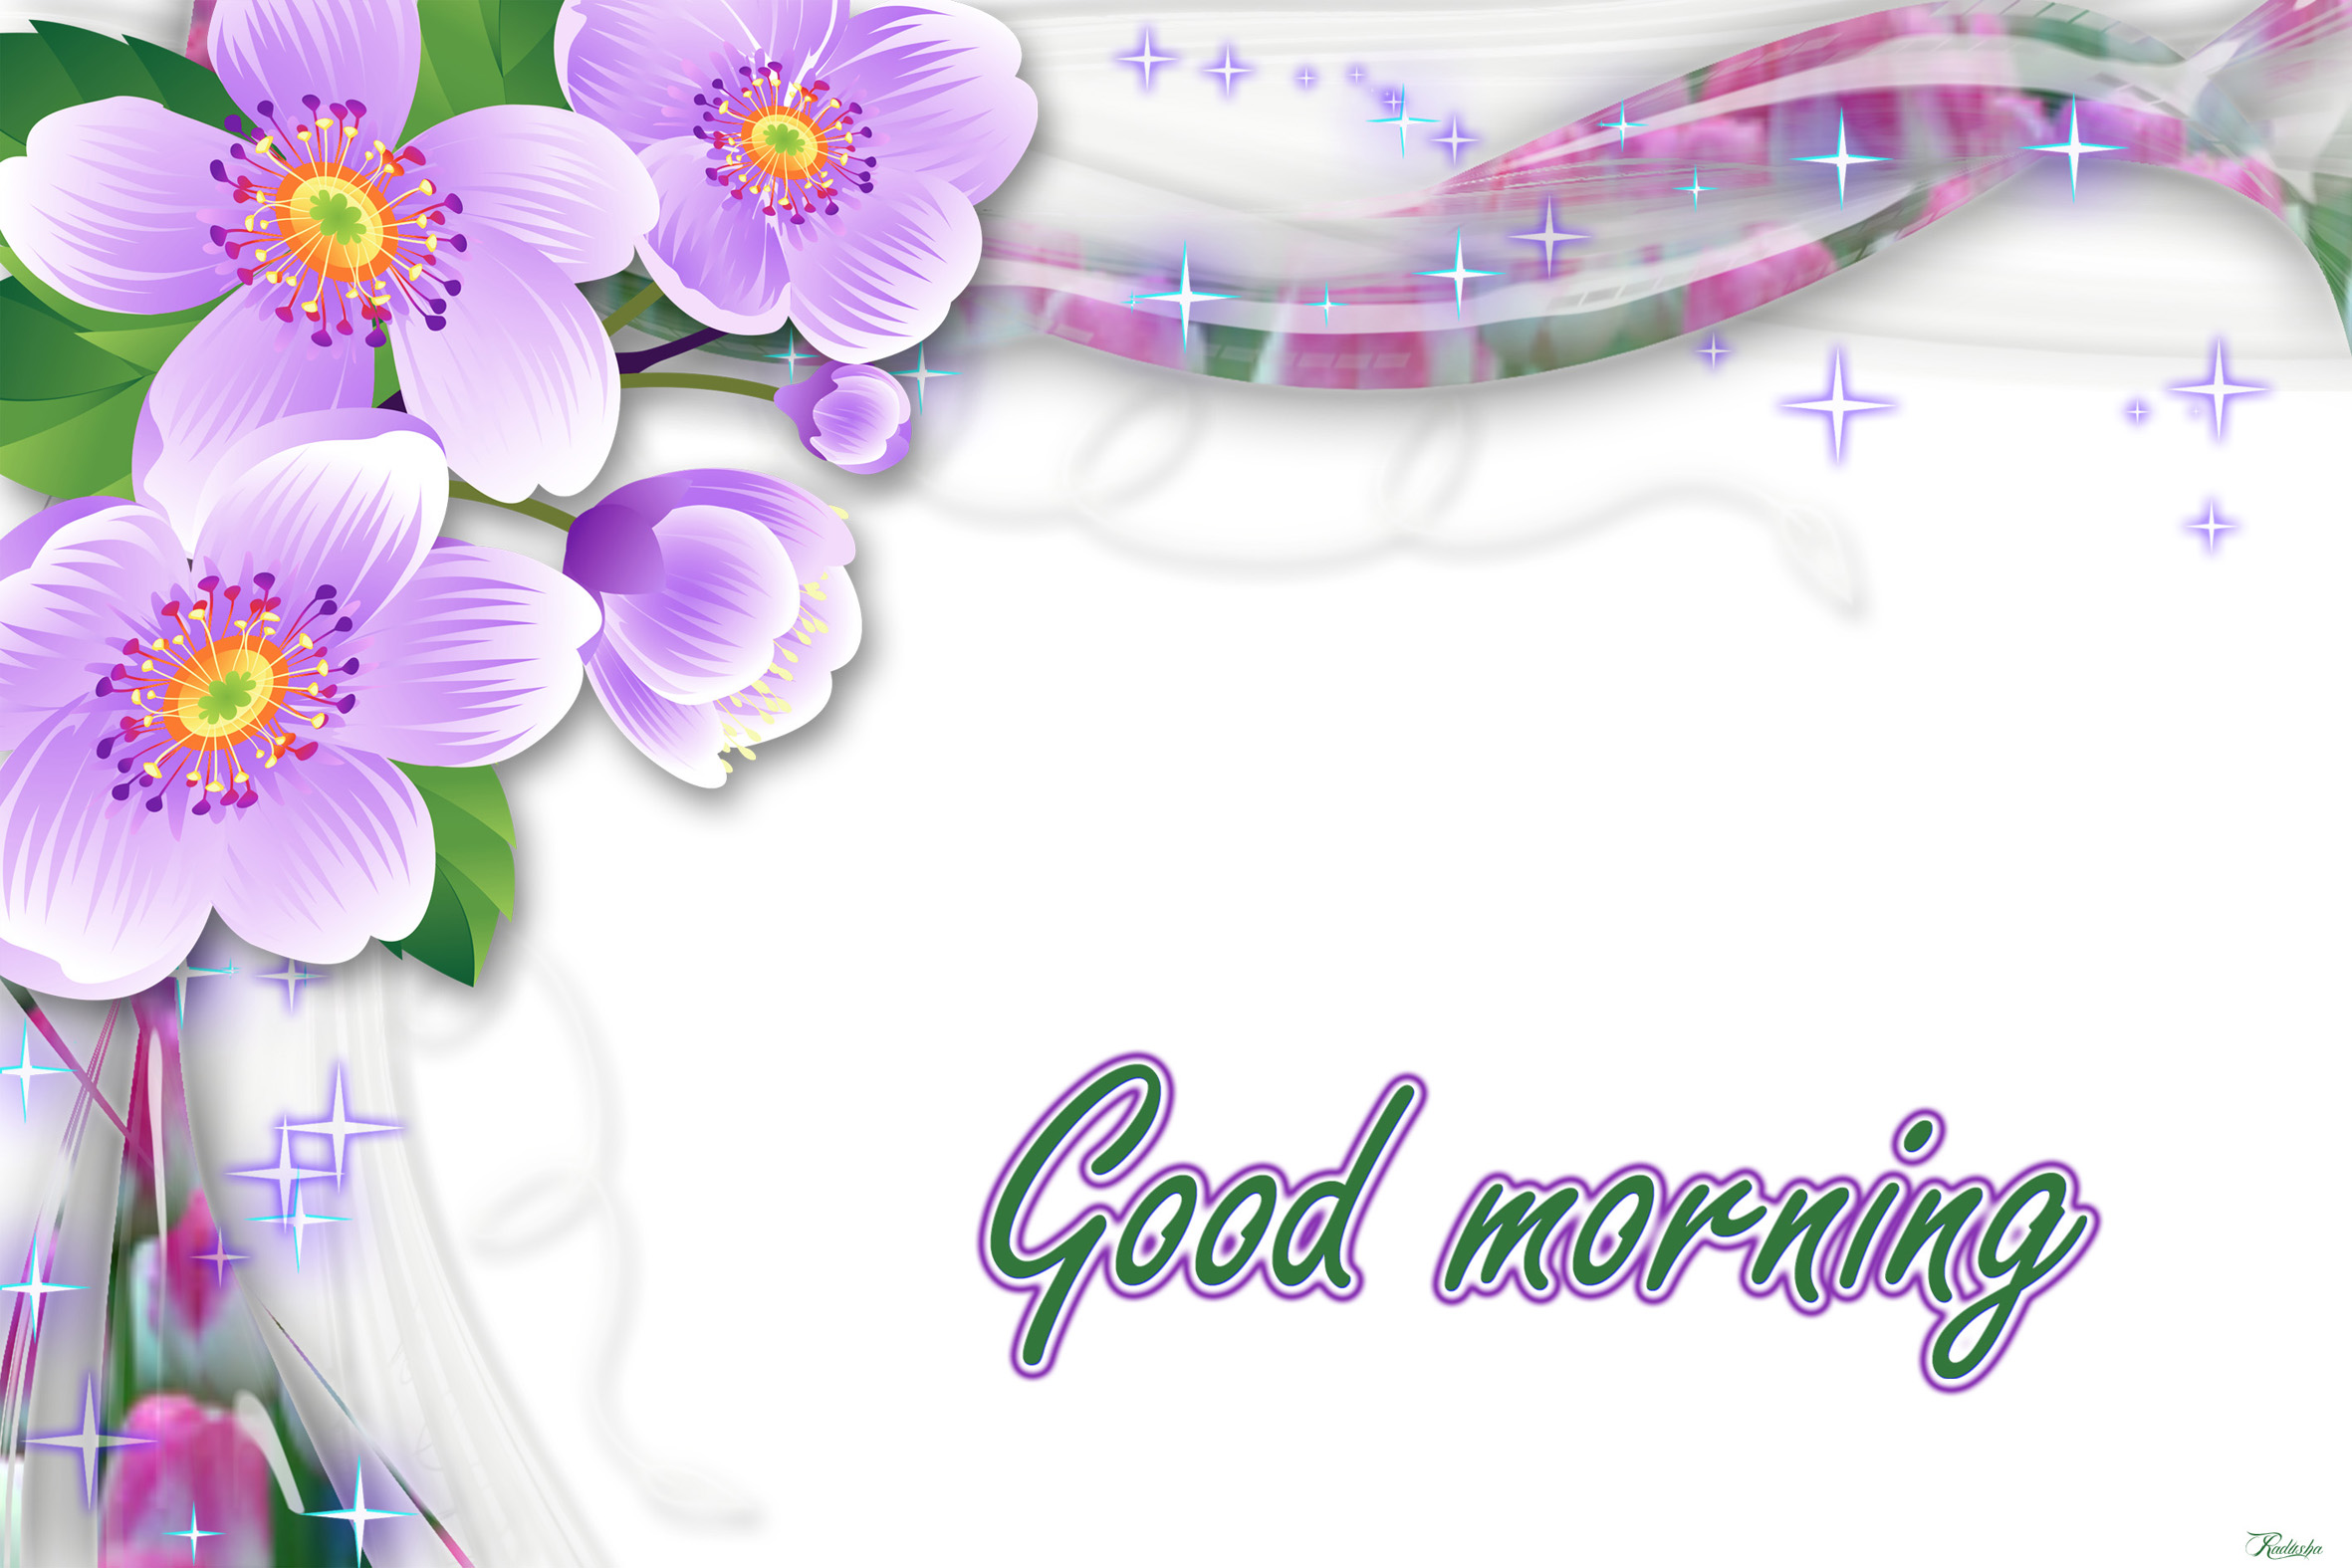 Good morning 3d wallpaper free download - playapk.org - IssueWire